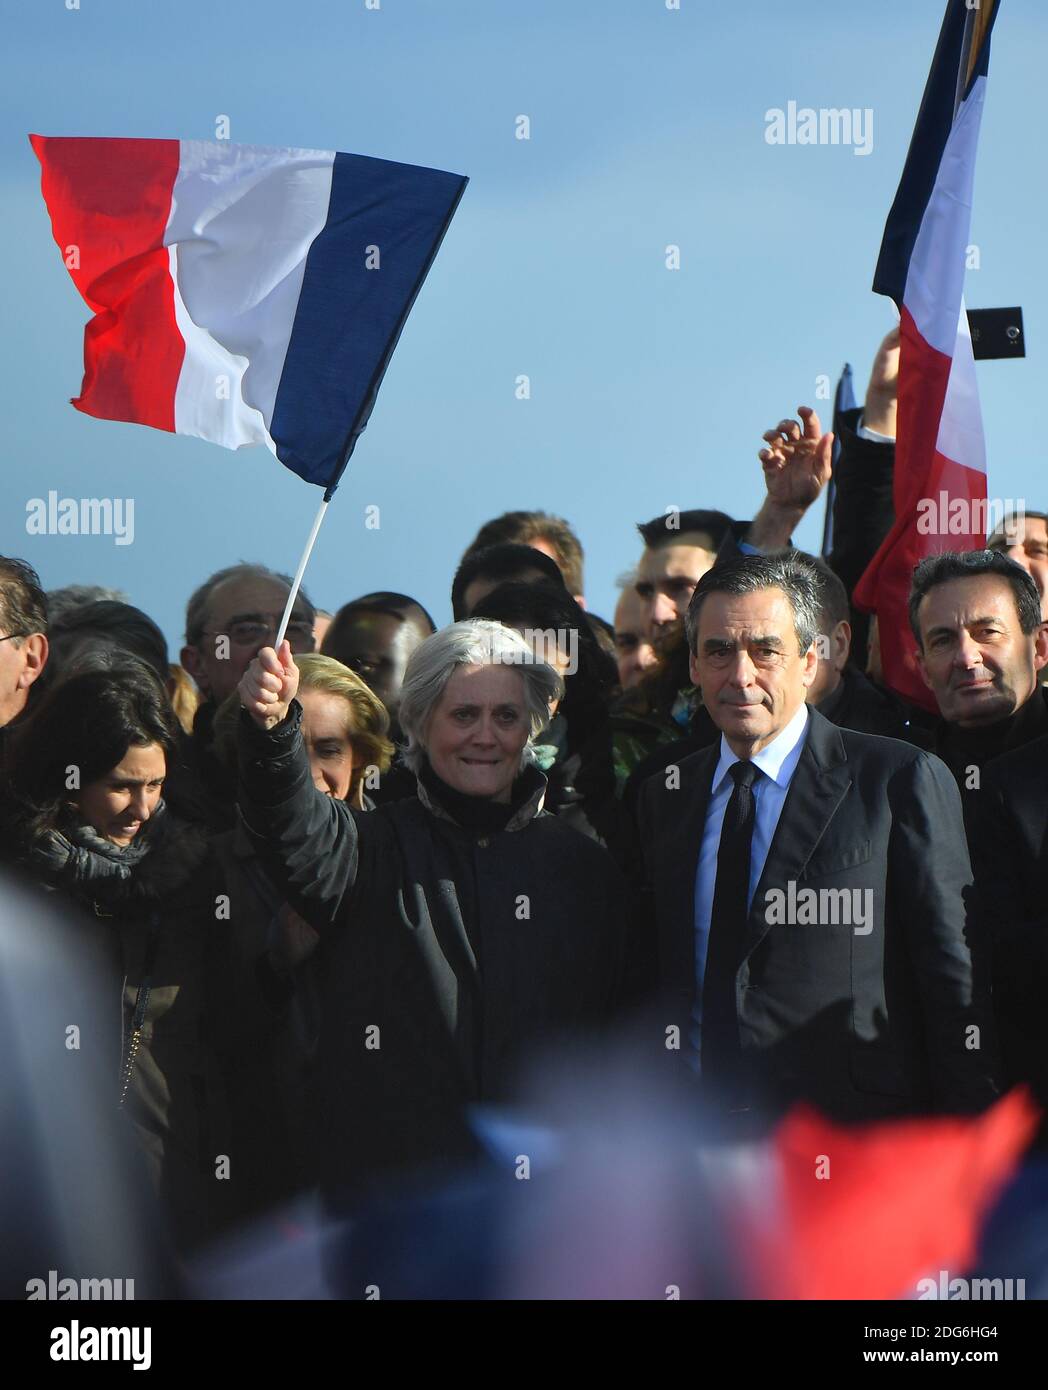 Presidential election candidate for the right-wing Les Republicains (LR) party Francois Fillon and wife Penelope Fillon and daughter Marie Fillon (L) gesture during a rally at the Place du Trocadero, in Paris, France, on March 5, 2017. Embattled French conservative Francois Fillon told supporters to never give up the fight as he strivses to stay in the presidential election race amid an expenses scandal. Fillon, who is to be charged over claims he gave his wife and children highly-paid fake parliamentary jobs, told the rain-drenched crowd he had been attacked by everyone in the campaign. Photo Stock Photo